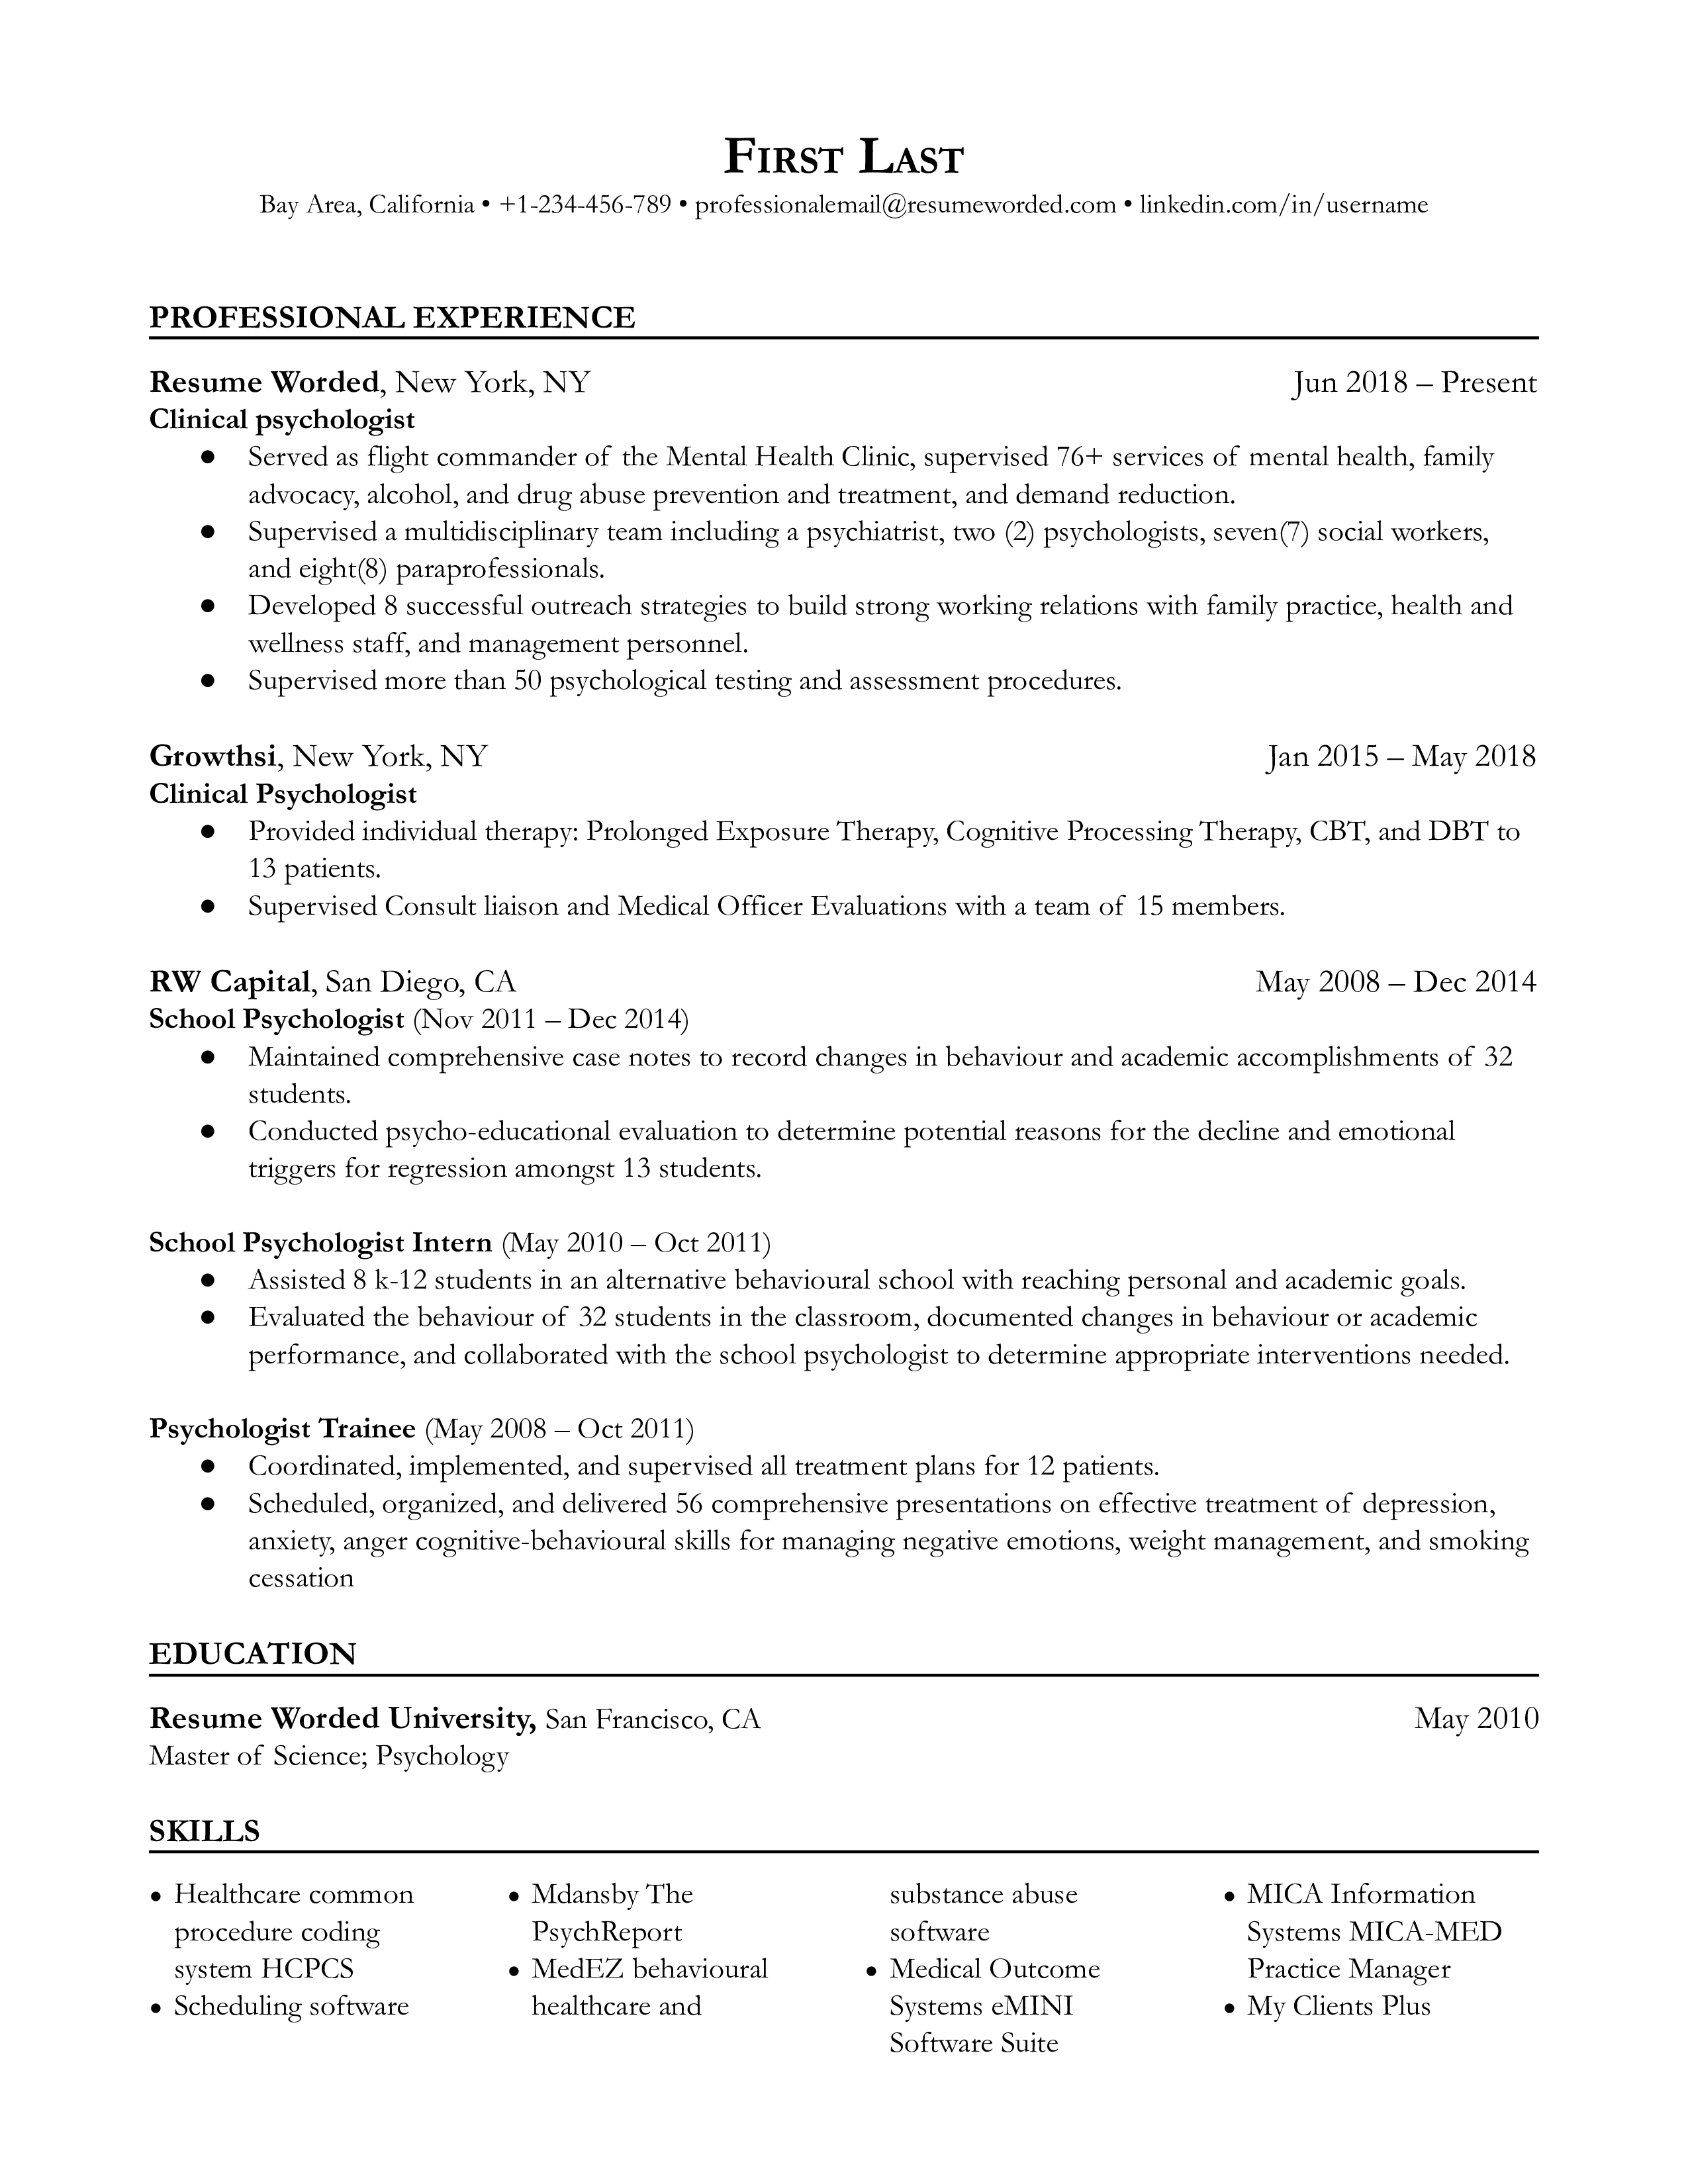 Professional CV of a Clinical Psychologist showcasing diverse clinical experience and continuous professional development.